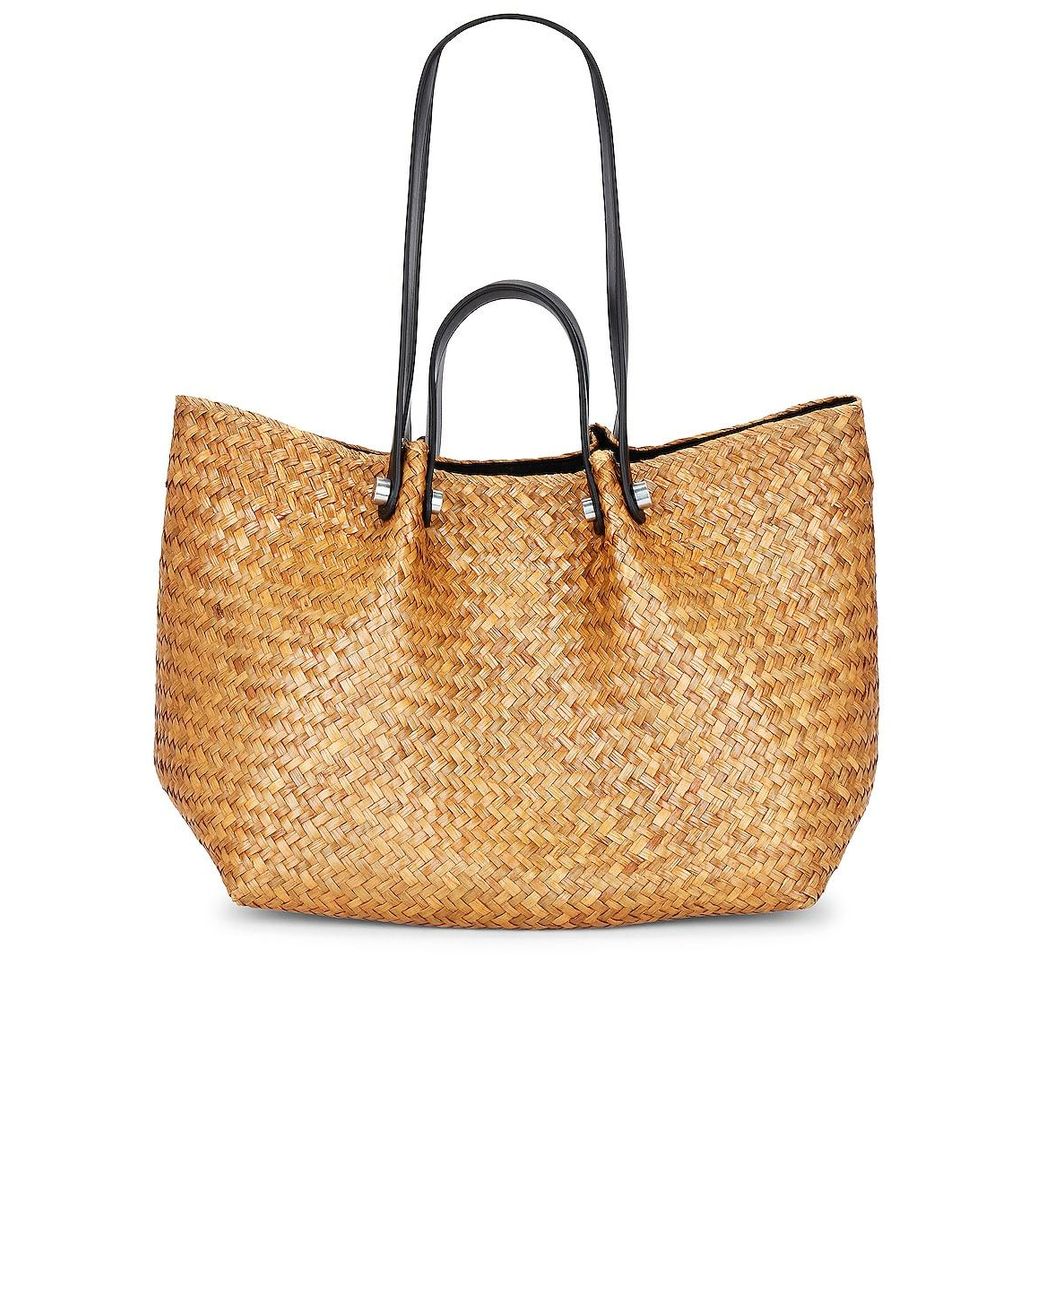 AllSaints Allington Straw Tote in Natural | Lyst